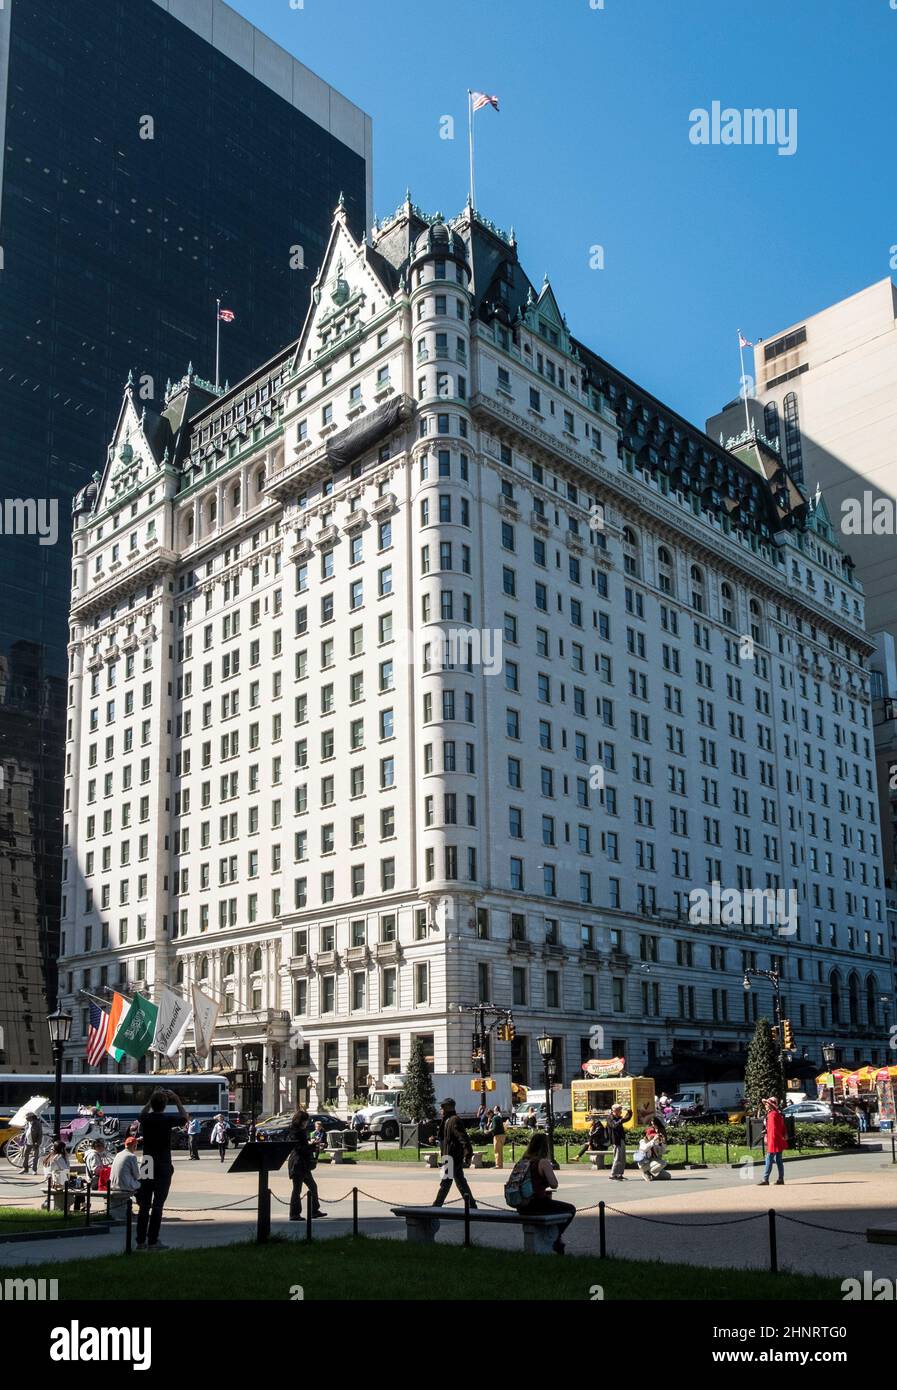 facade of 5 star hotel Plaza Fairmont at the 5th avenue in New York Stock Photo